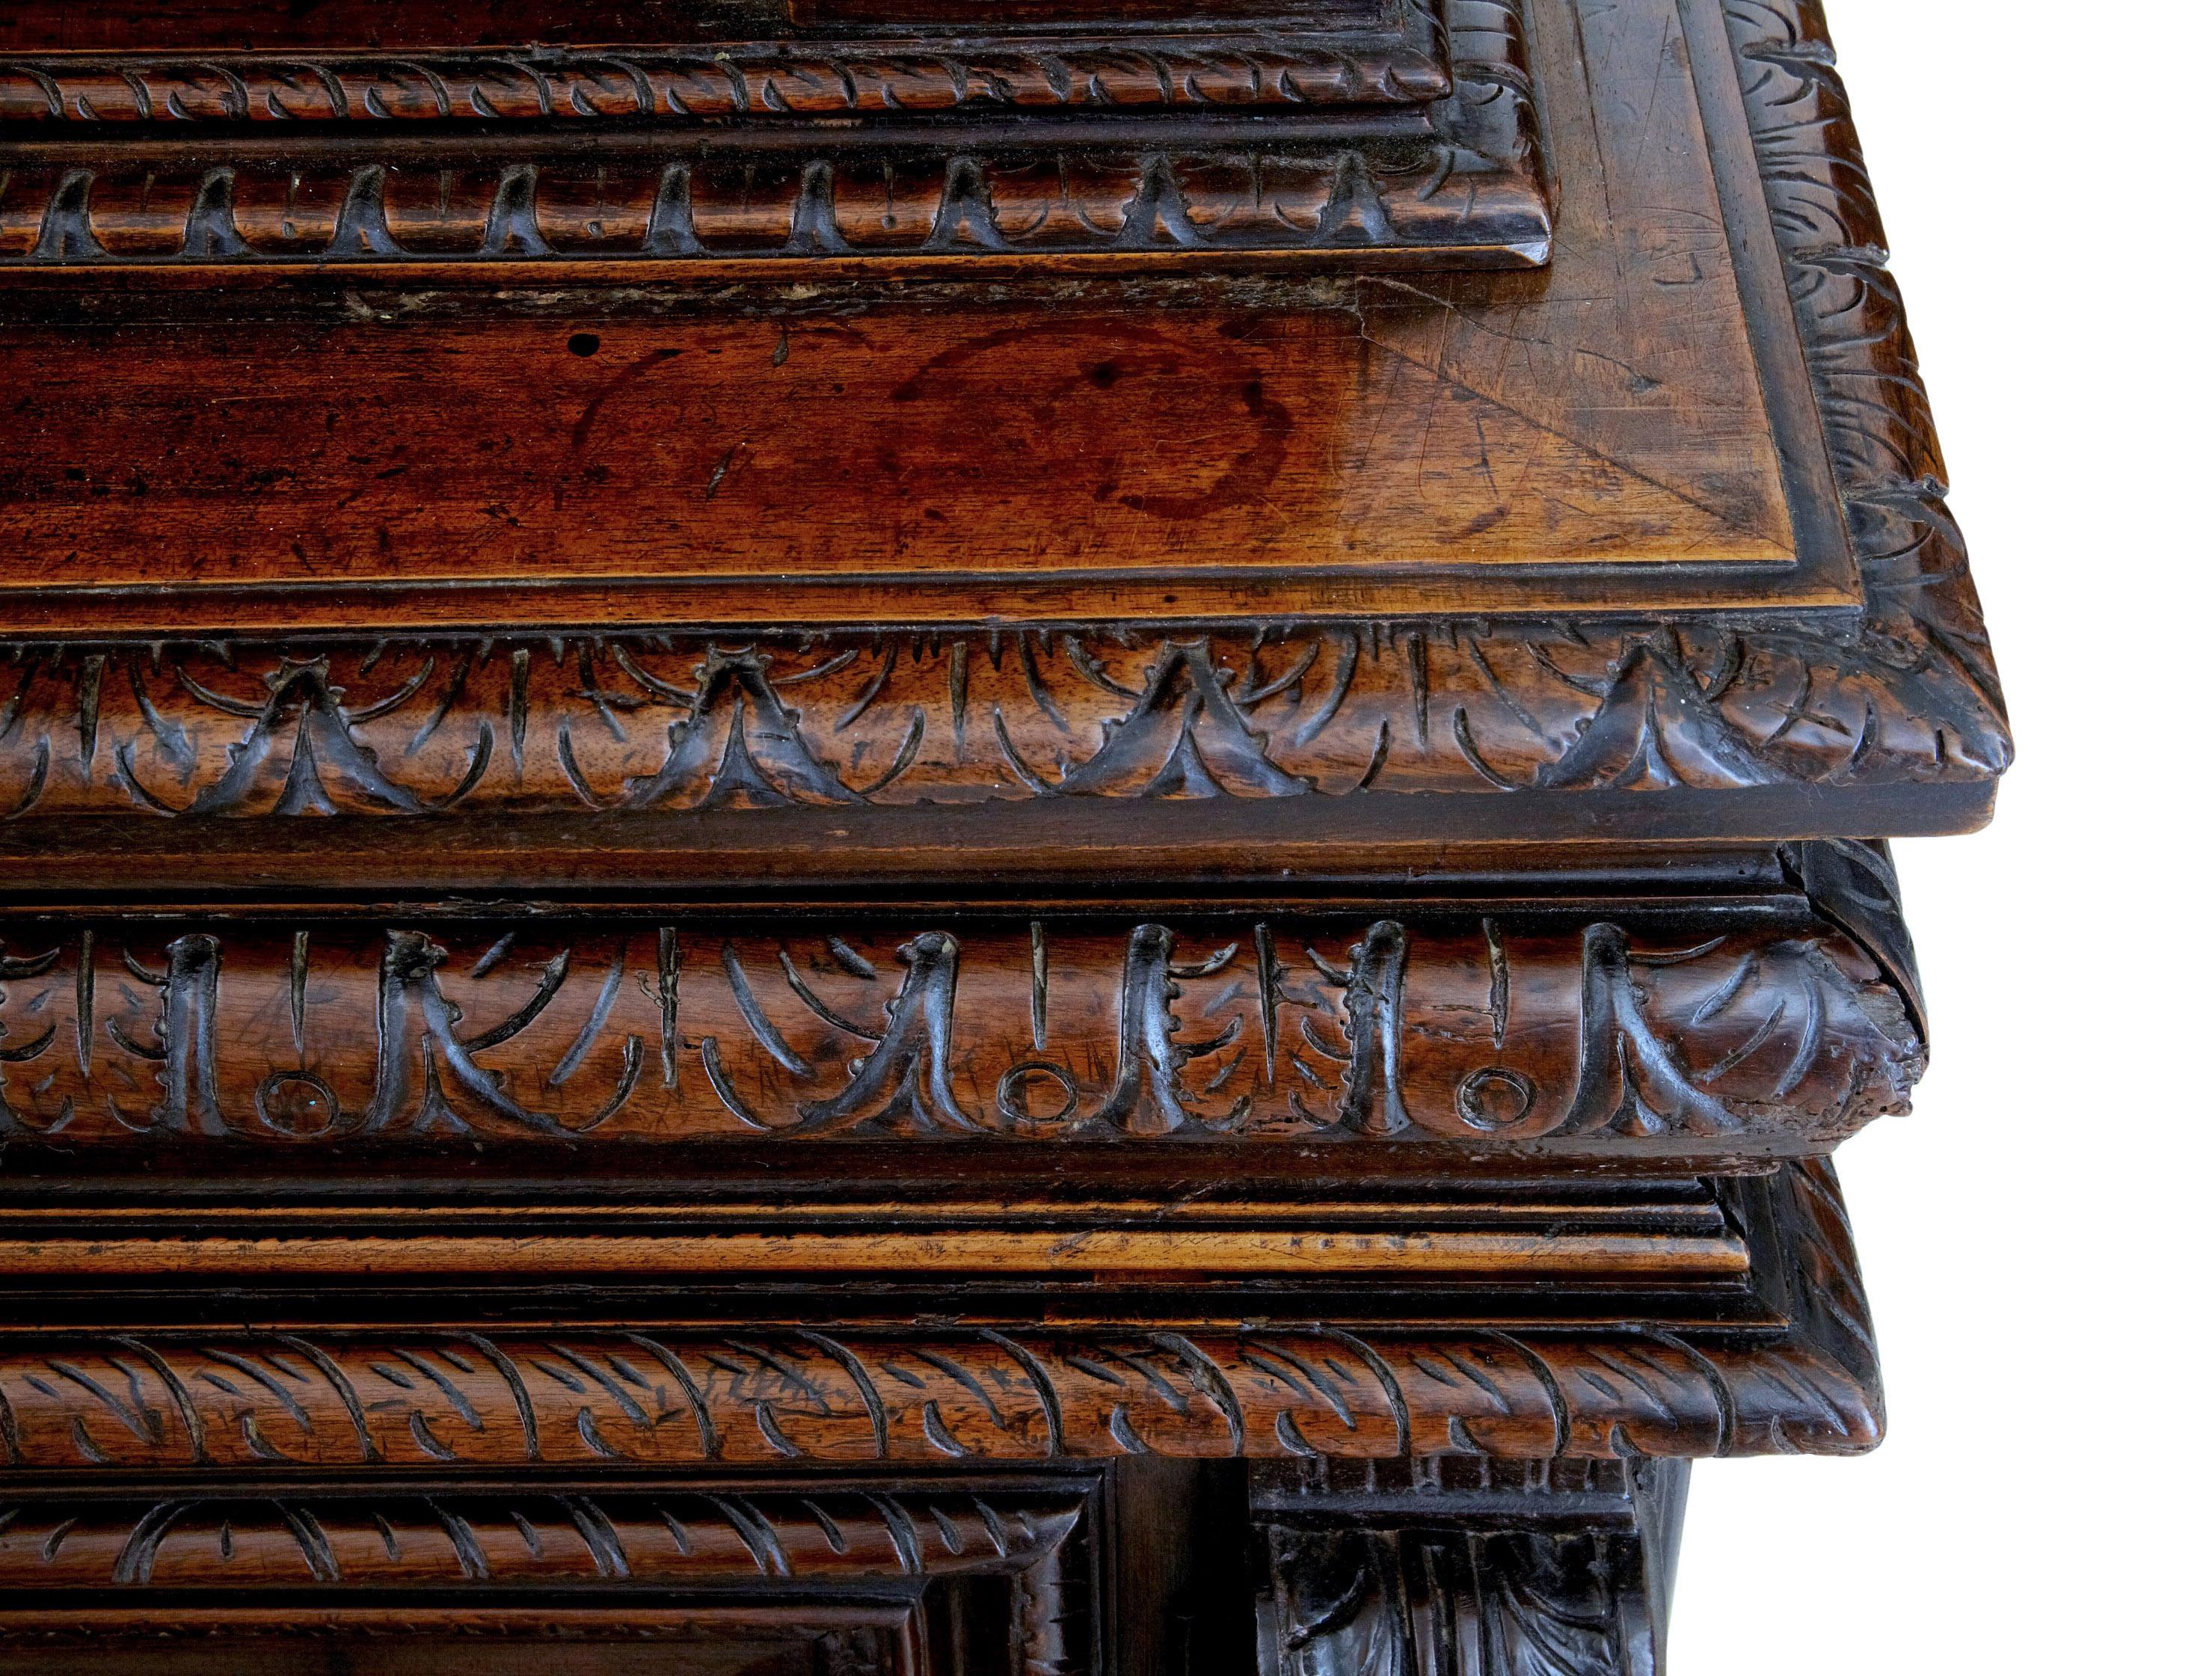 Mid-19th century profusely carved french walnut cabinet, circa 1850.

2 part carved walnut cabinet. Top section of beautifully carved double doors, flanked by columns, surmounted by cornice. Opens to reveal single shelf inside. Bottom section